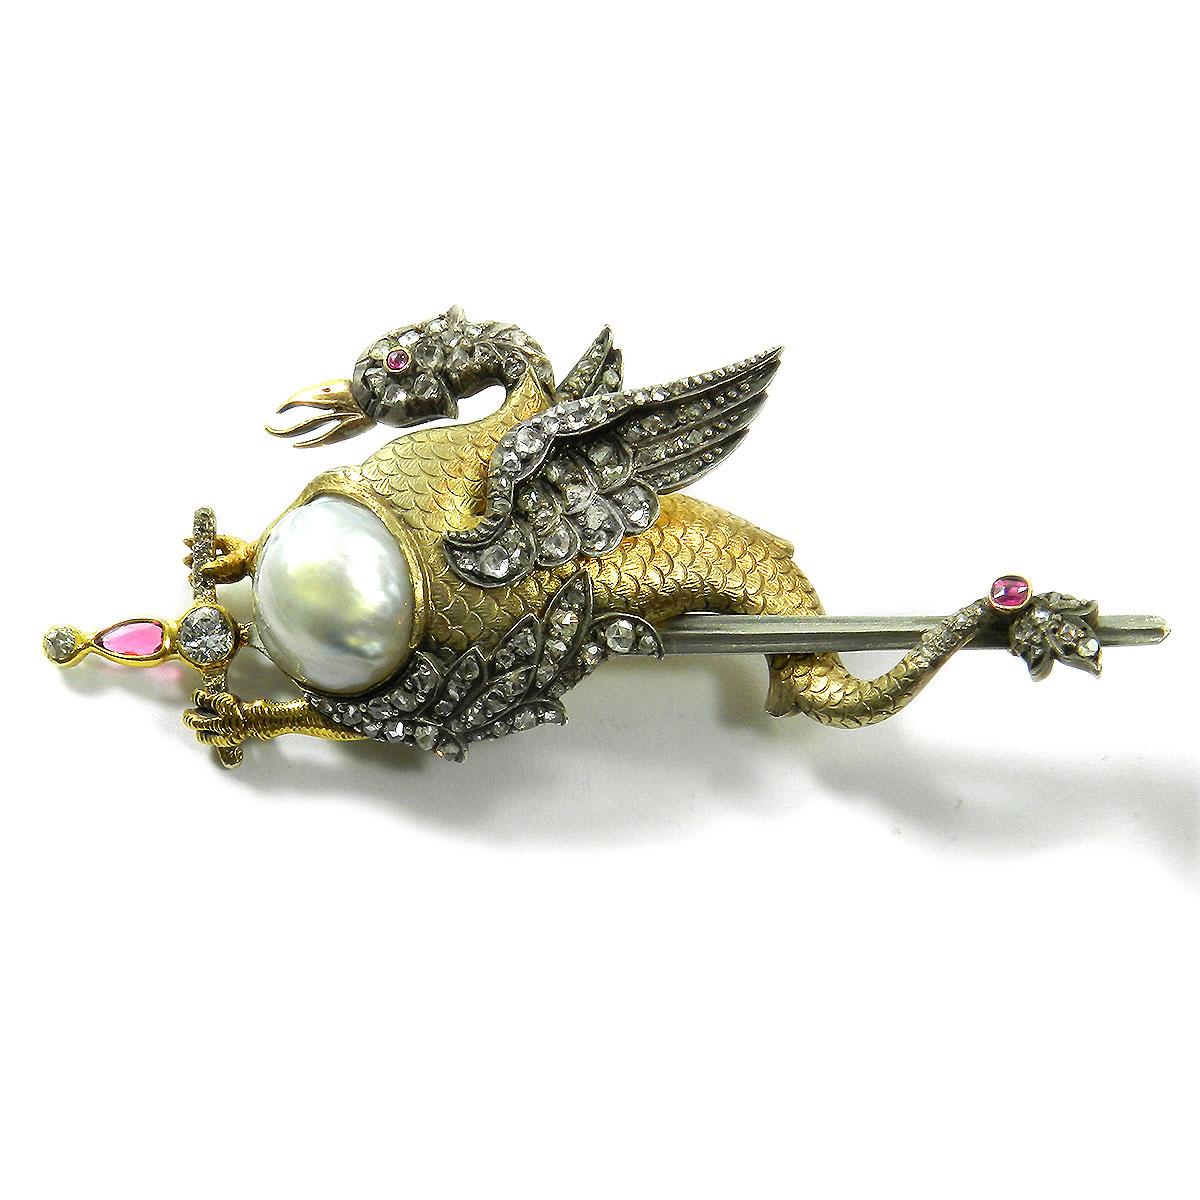 Antique baroque pearl and diamond dragon Brooch in Gold circa 1890

Very decorative brooch in the form of a dragon riding a silver sword, the scaled decorated body set with a baroque pearl, the head and wings set with countless diamond roses, the